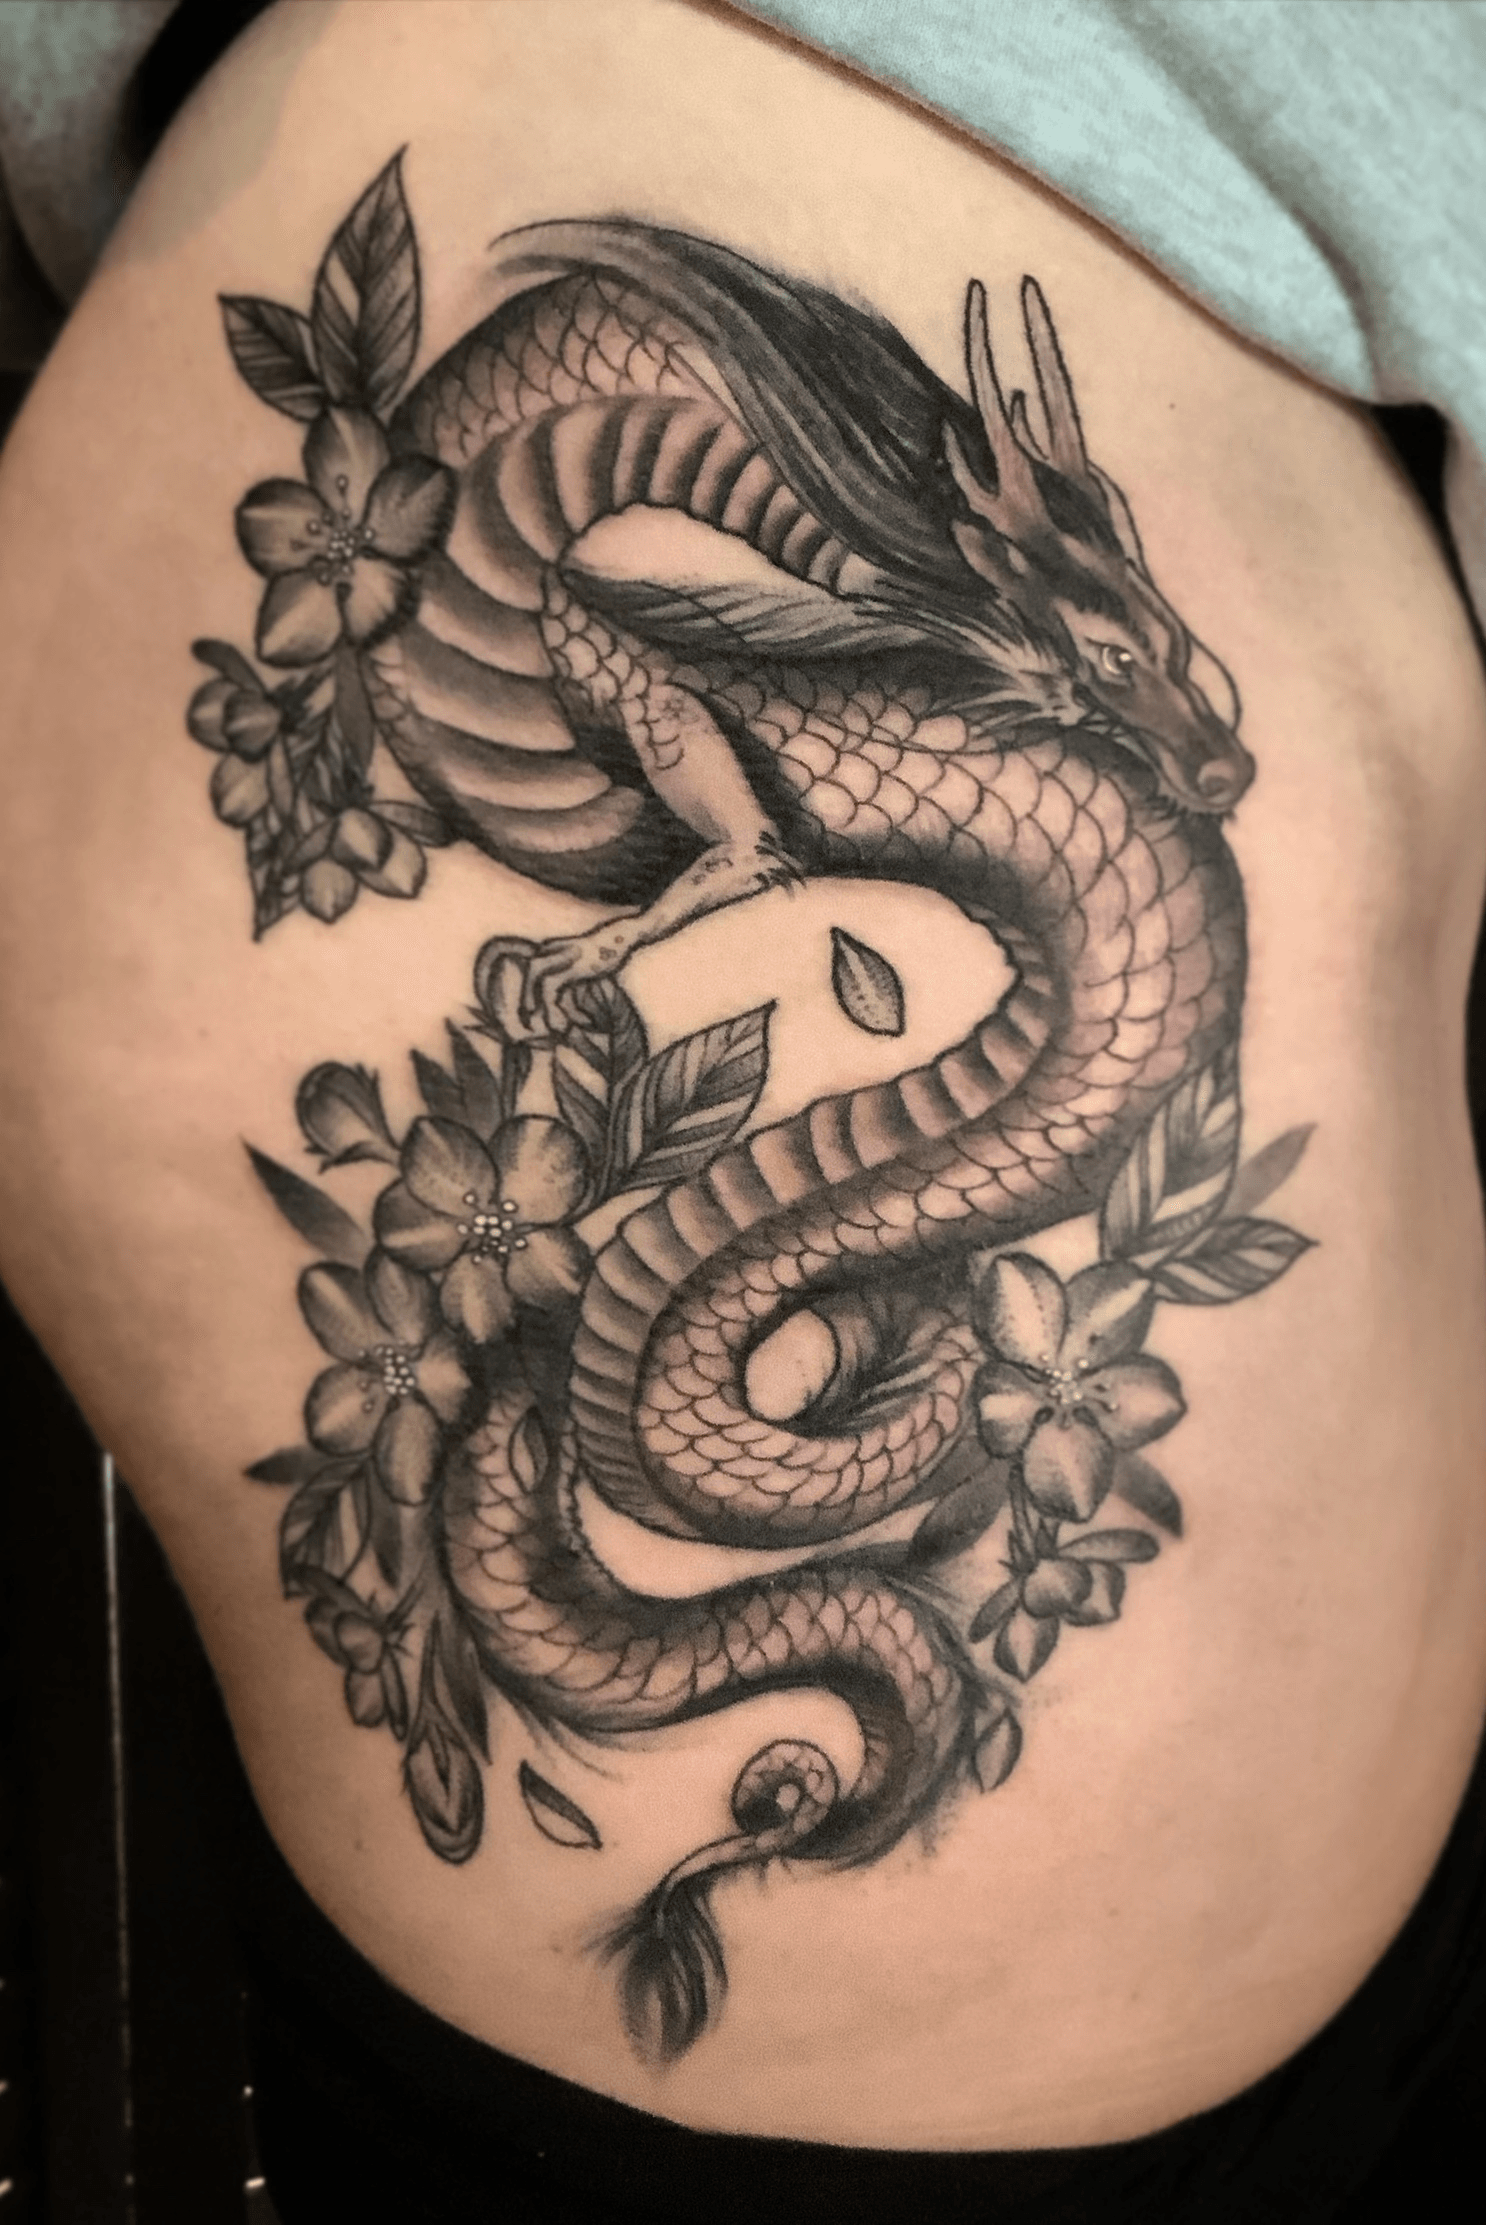 33 Meaningful Dragon Tattoo Designs And Ideas You Can Try